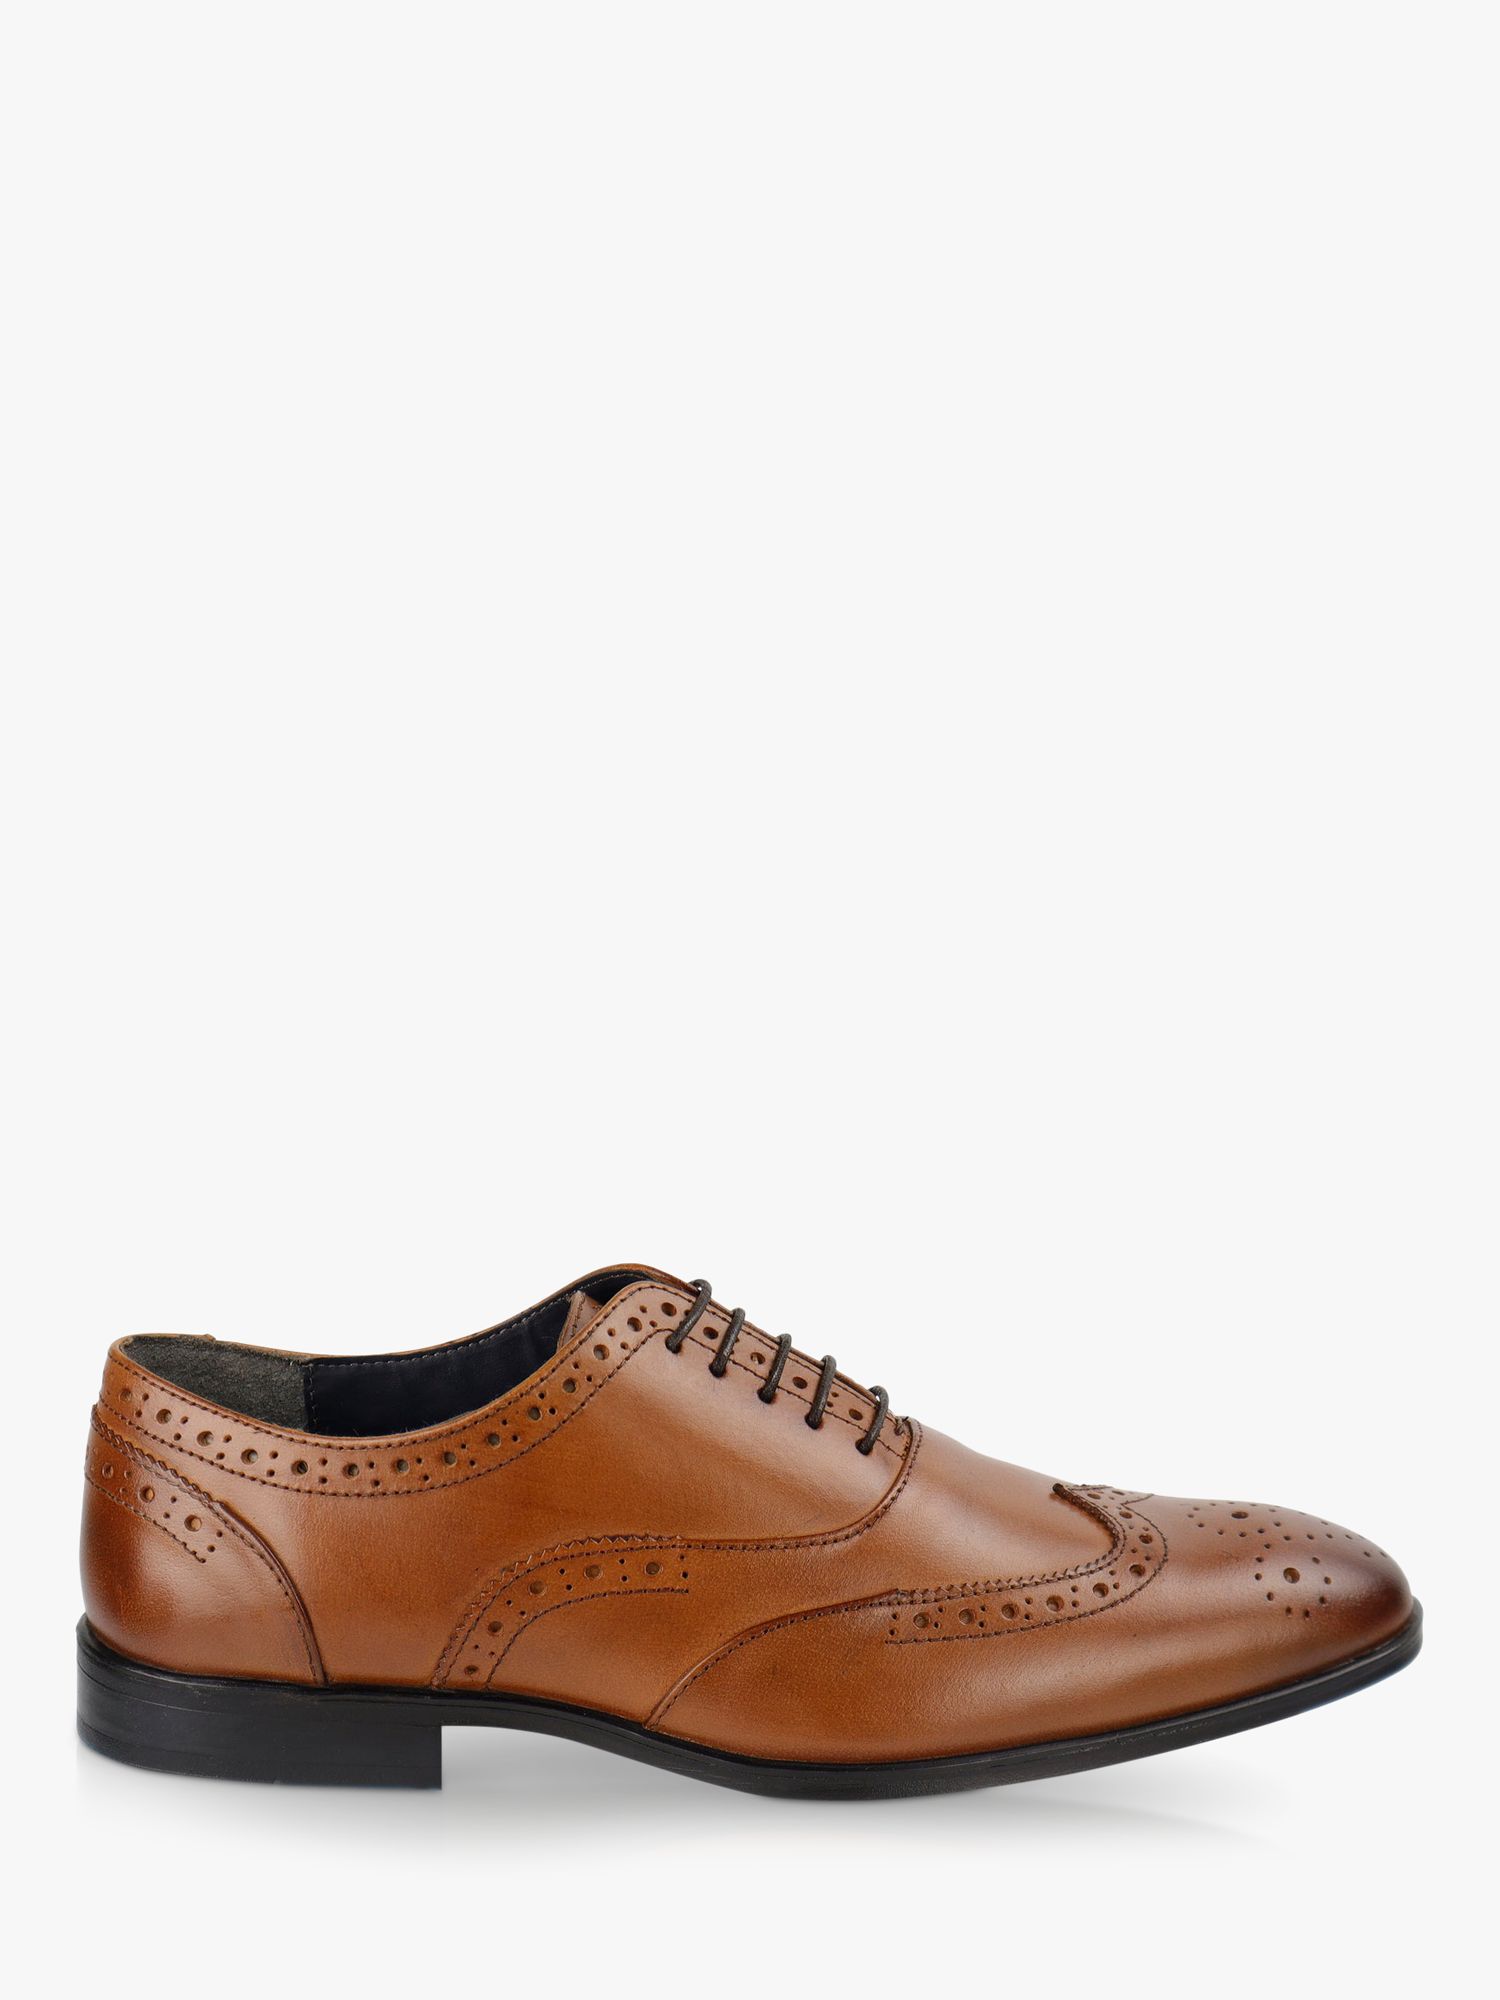 Silver Street London Leather Oxford Brogue Shoes, Tan, 7